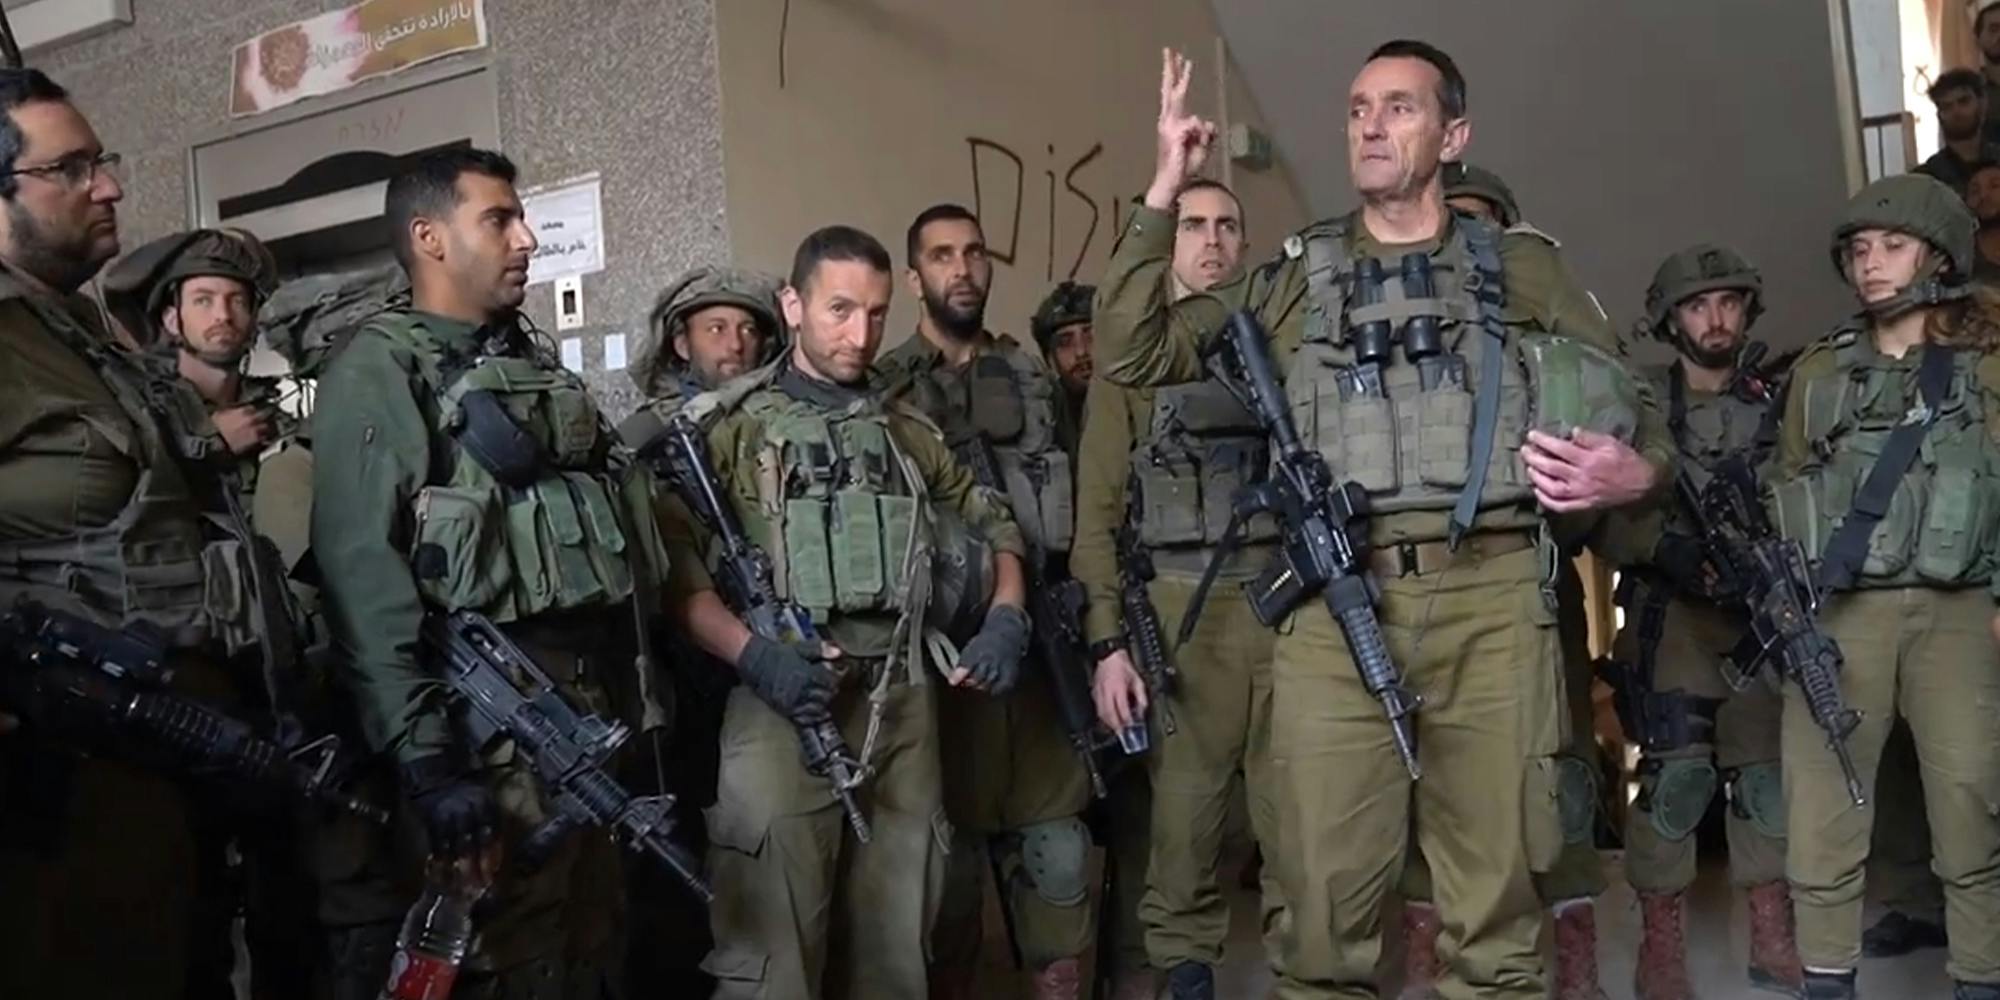 video of IDF soldiers being told not to shoot surrendering people in Gaza goes viral